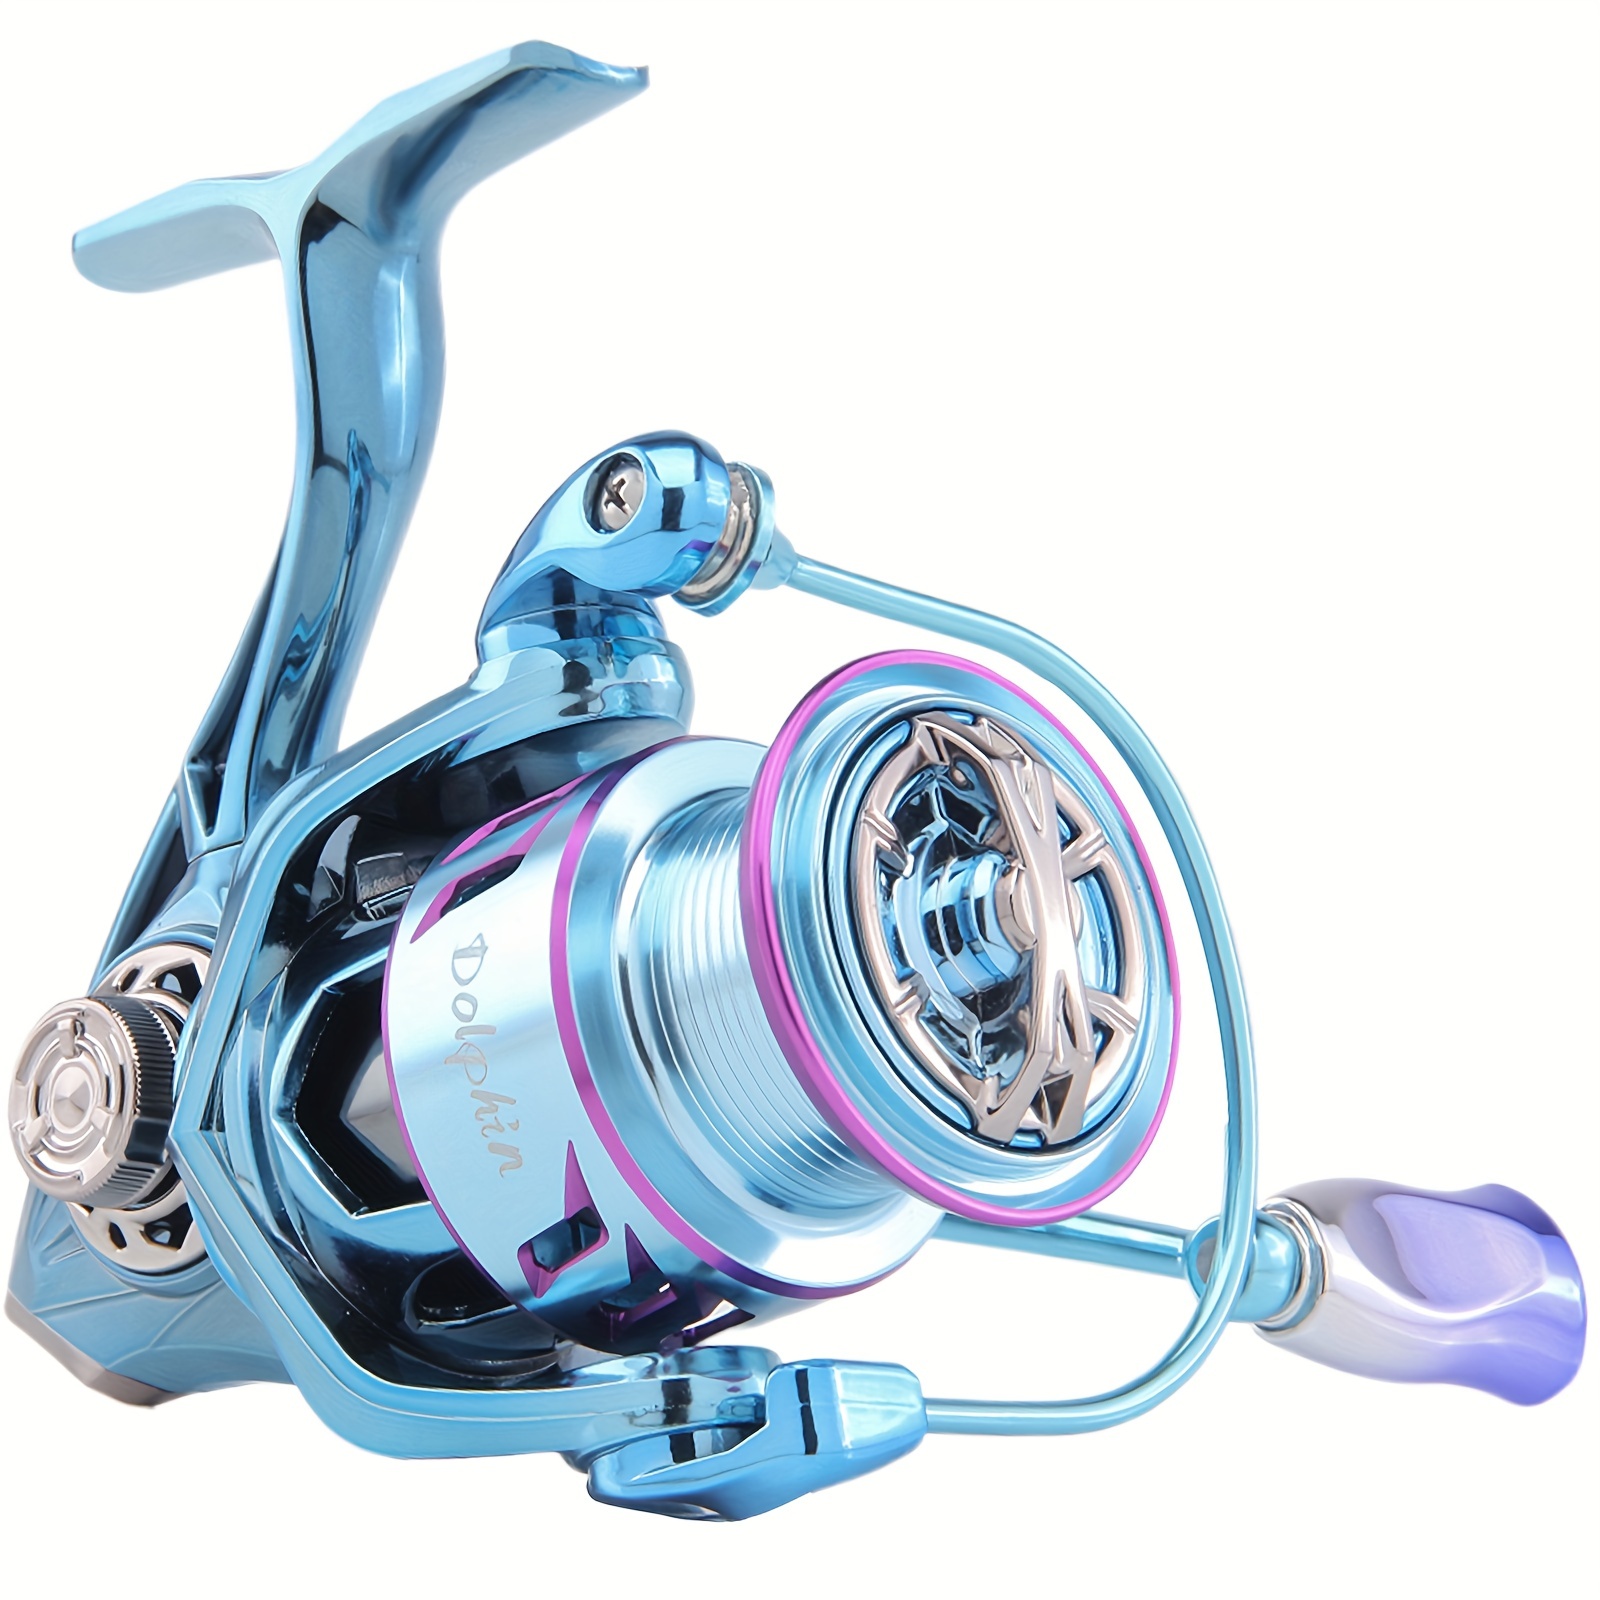 HAUT TON Dolphin 1500/2500/3000 Advance Edition Spinning Reel, 5.2:1Gear  Ratio, 22LBS, 5+1BB, Backlash Free Bearing, Sealed Drag System, Saltwater,  Fr